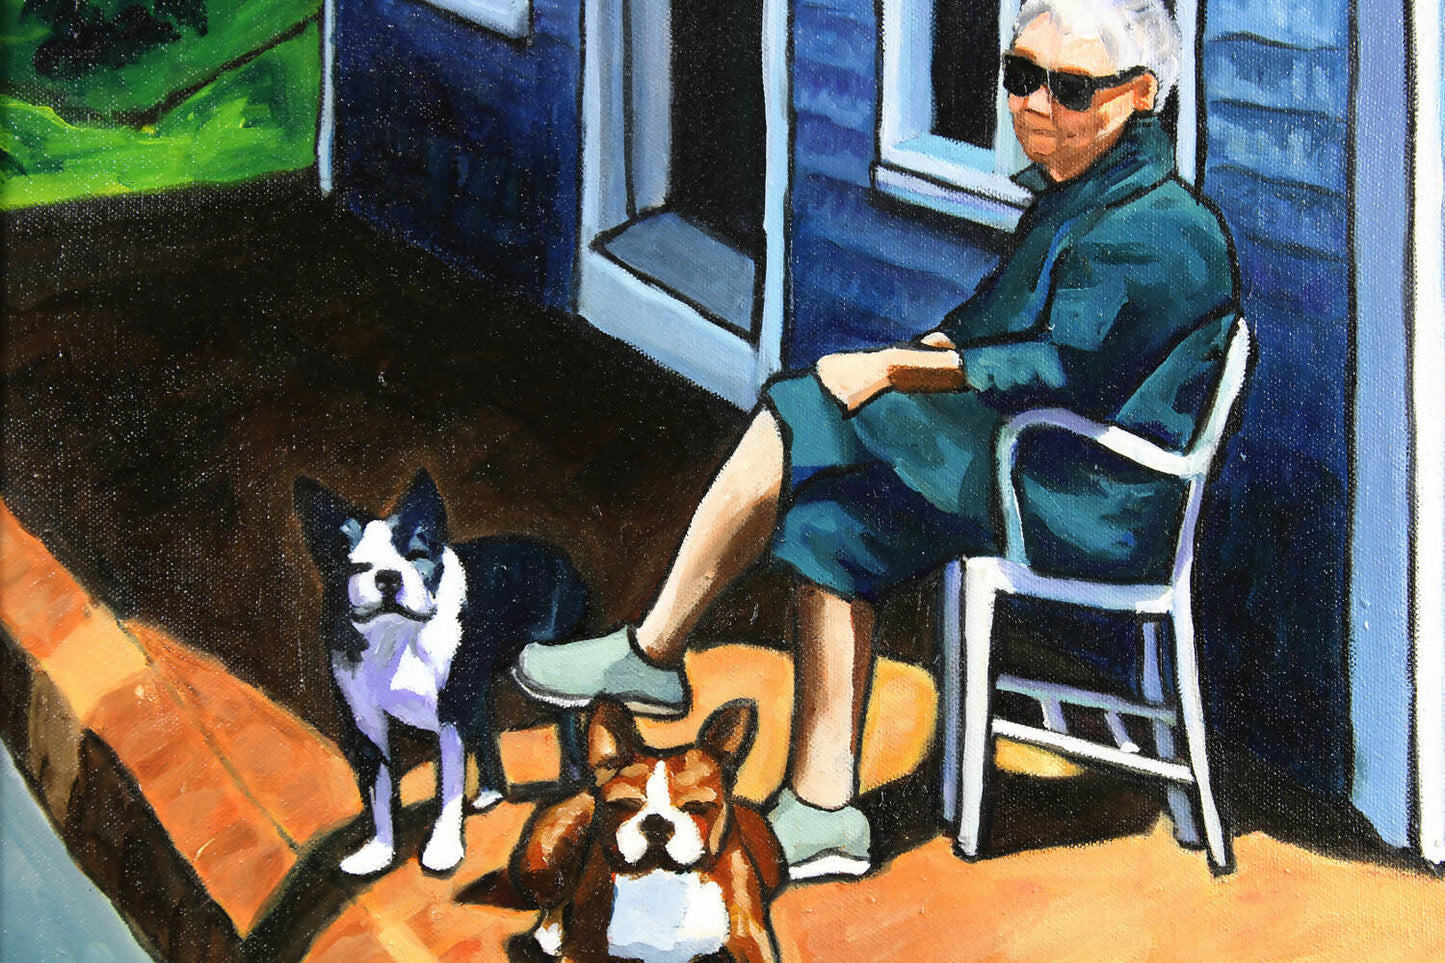 Gallery Owner with Dogs